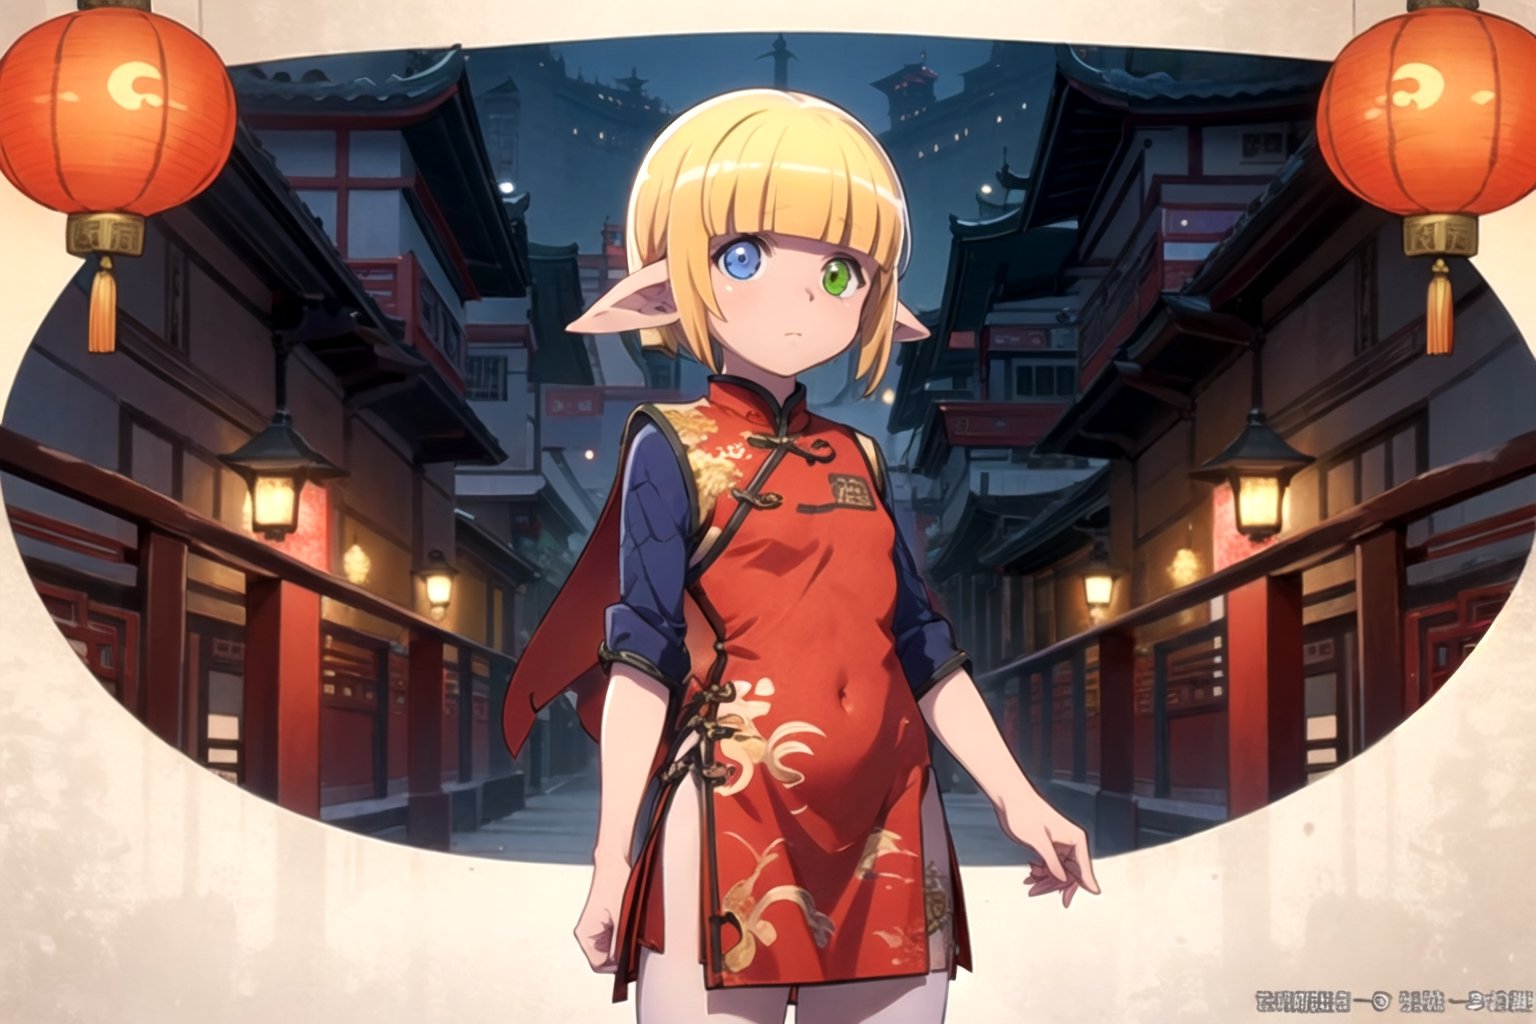 //Quality,
(masterpiece), (best quality), 8k illustration,
//Character,
, solo, china background, Chinatown, Chinese outfit,  heterochromia, one blue eye on the left of the image, one green eye on the right of the image, long pointy ears

1child, red theme, Chinese lantern, mare bello fiore, Chinese decoration, red outfit, red uniform, Chinese new year, Chinese festival, chinese dress, chinese theme outfit, chinese pattern outfit